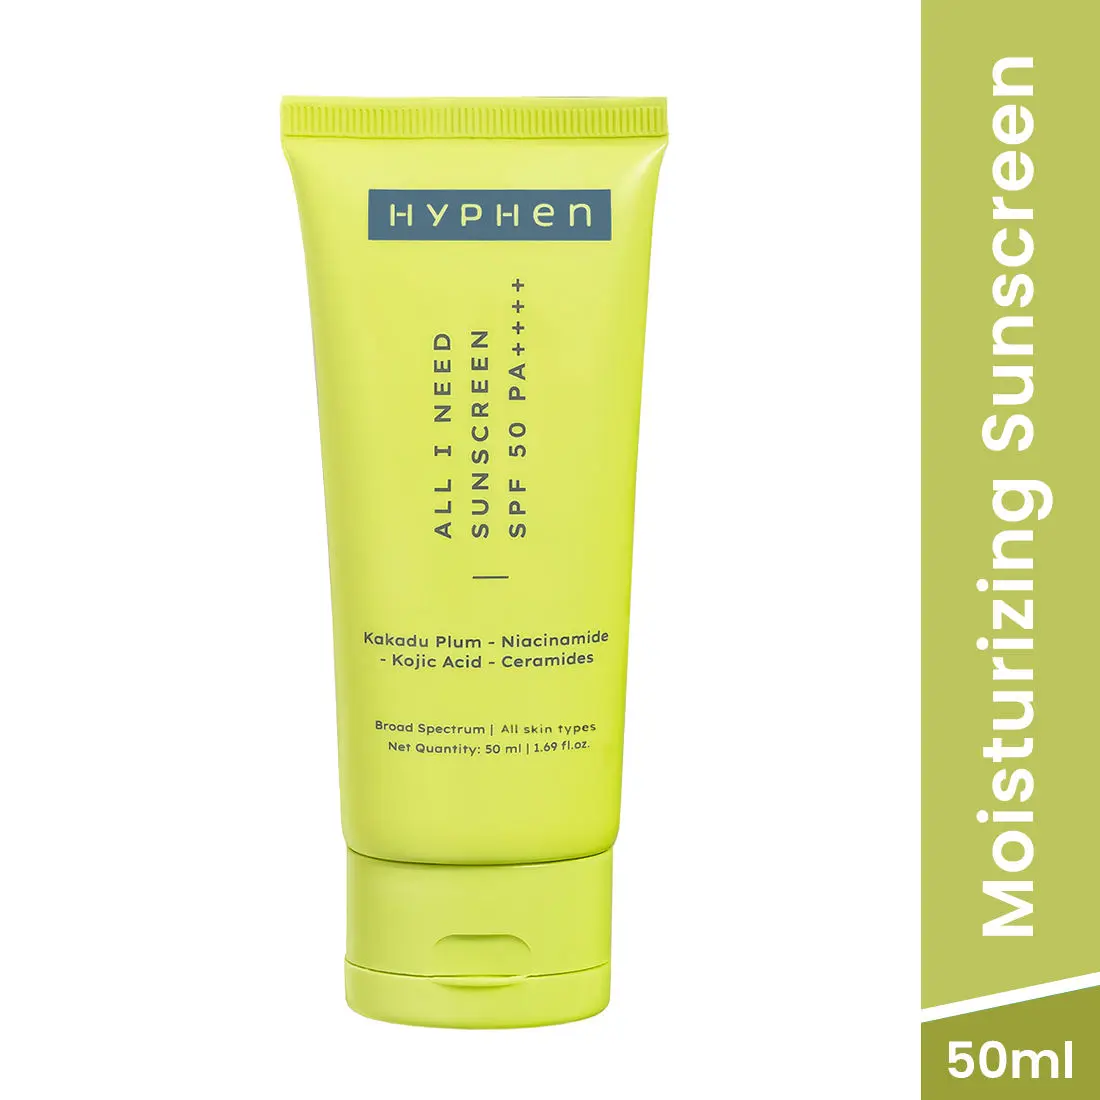 Hyphen All I Need Sunscreen SPF 50 PA ++++ with Ceramide | Lightweight, Moisturizing & No White Cast | UV Protection & Blue Light Protection - 50ml